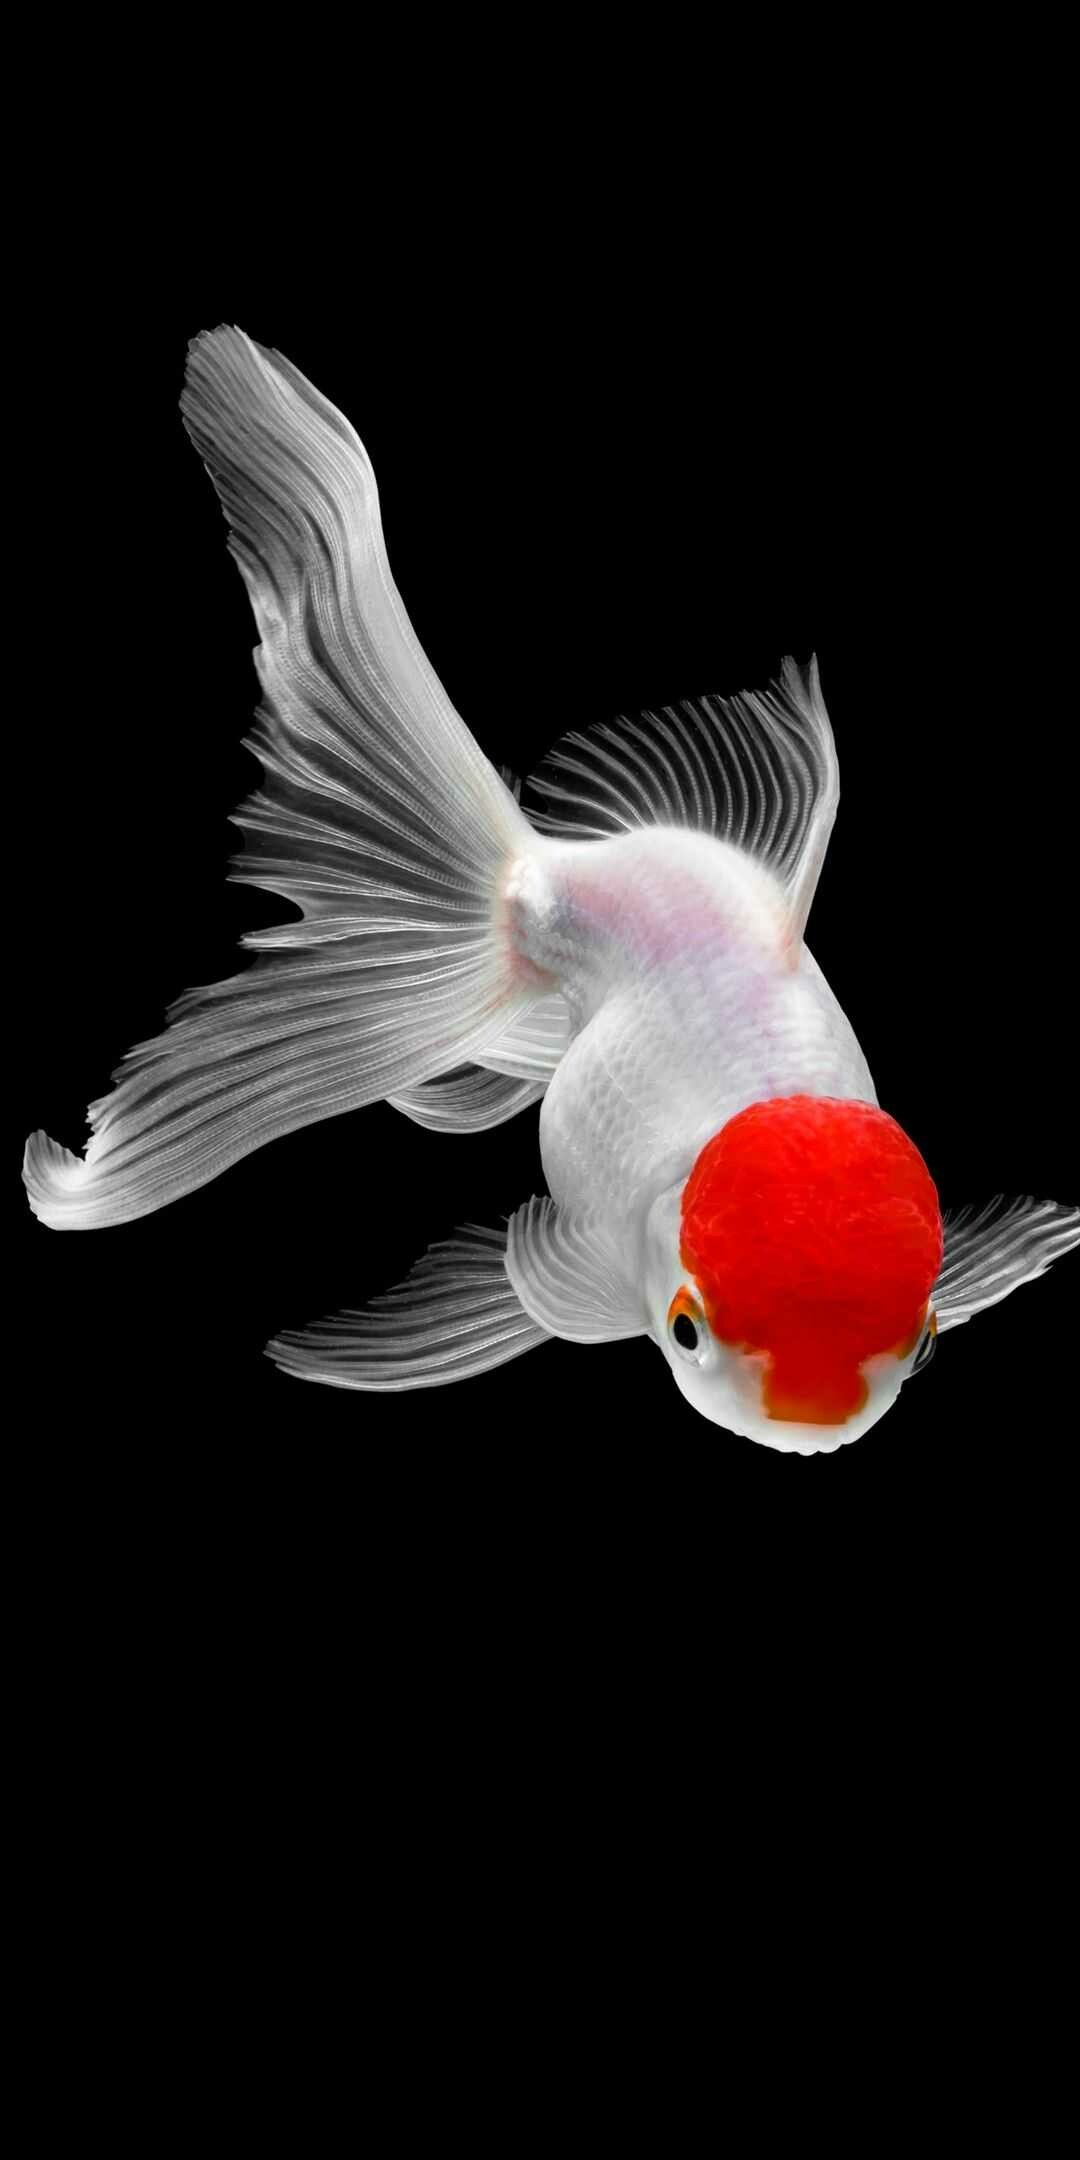 Android fish wallpapers, Stunning underwater photography, Free high definition images, Beautiful aquatic wildlife, 1080x2160 HD Phone